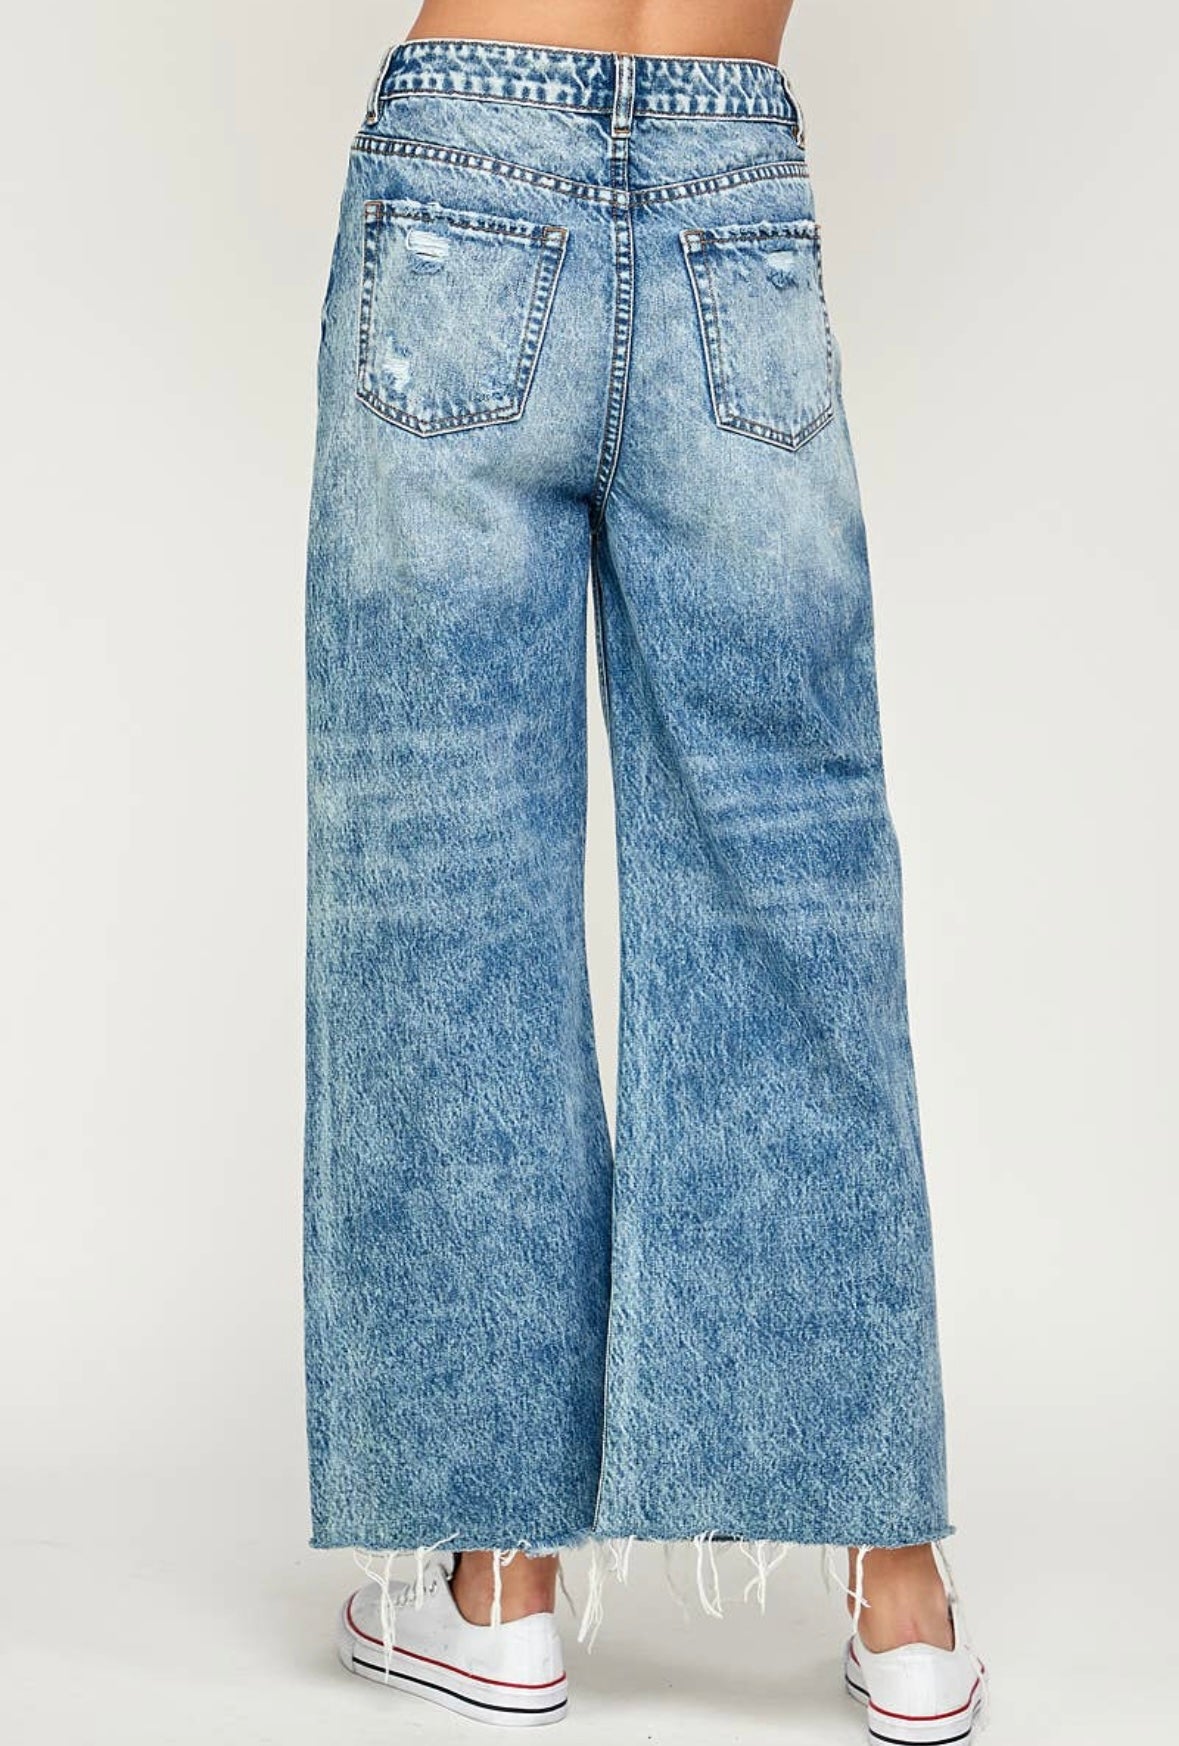 Outlaw Jeans